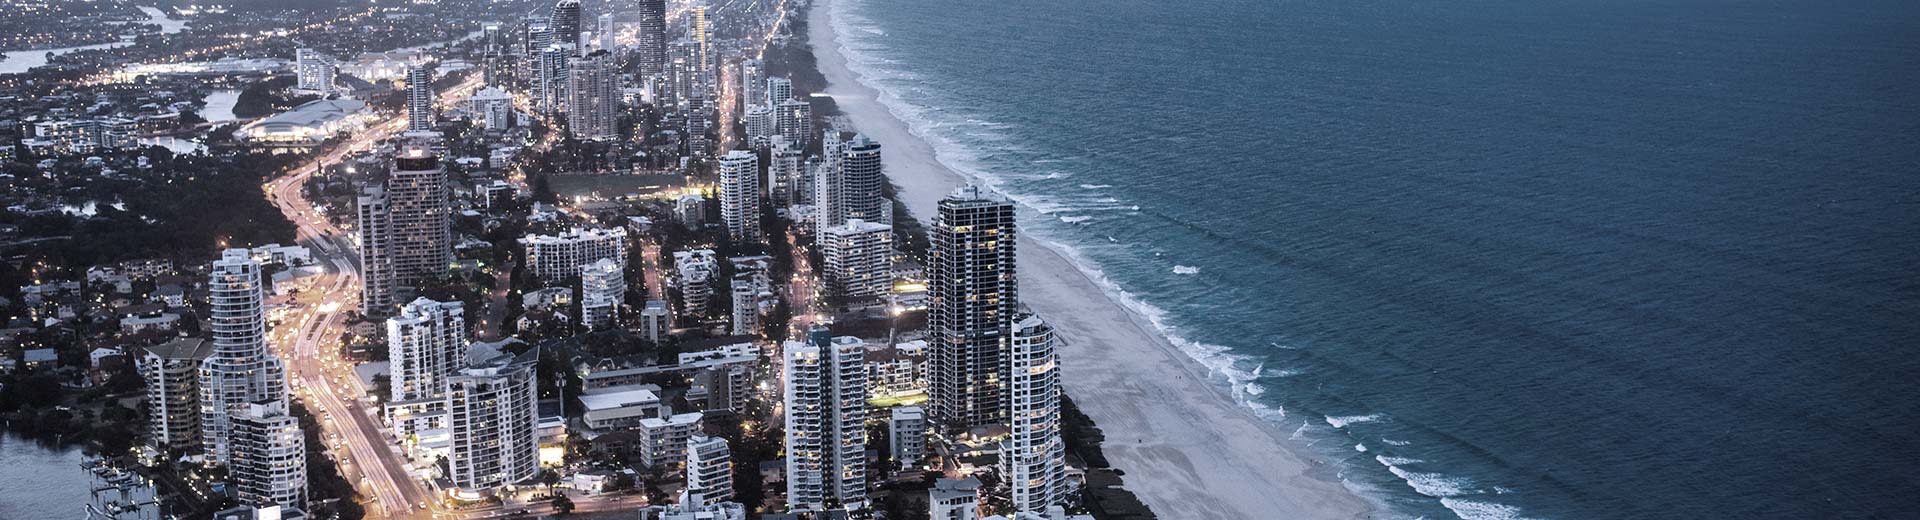 The high-rise buildings of Gold Coast stretch out along the gorgeous shoreline.